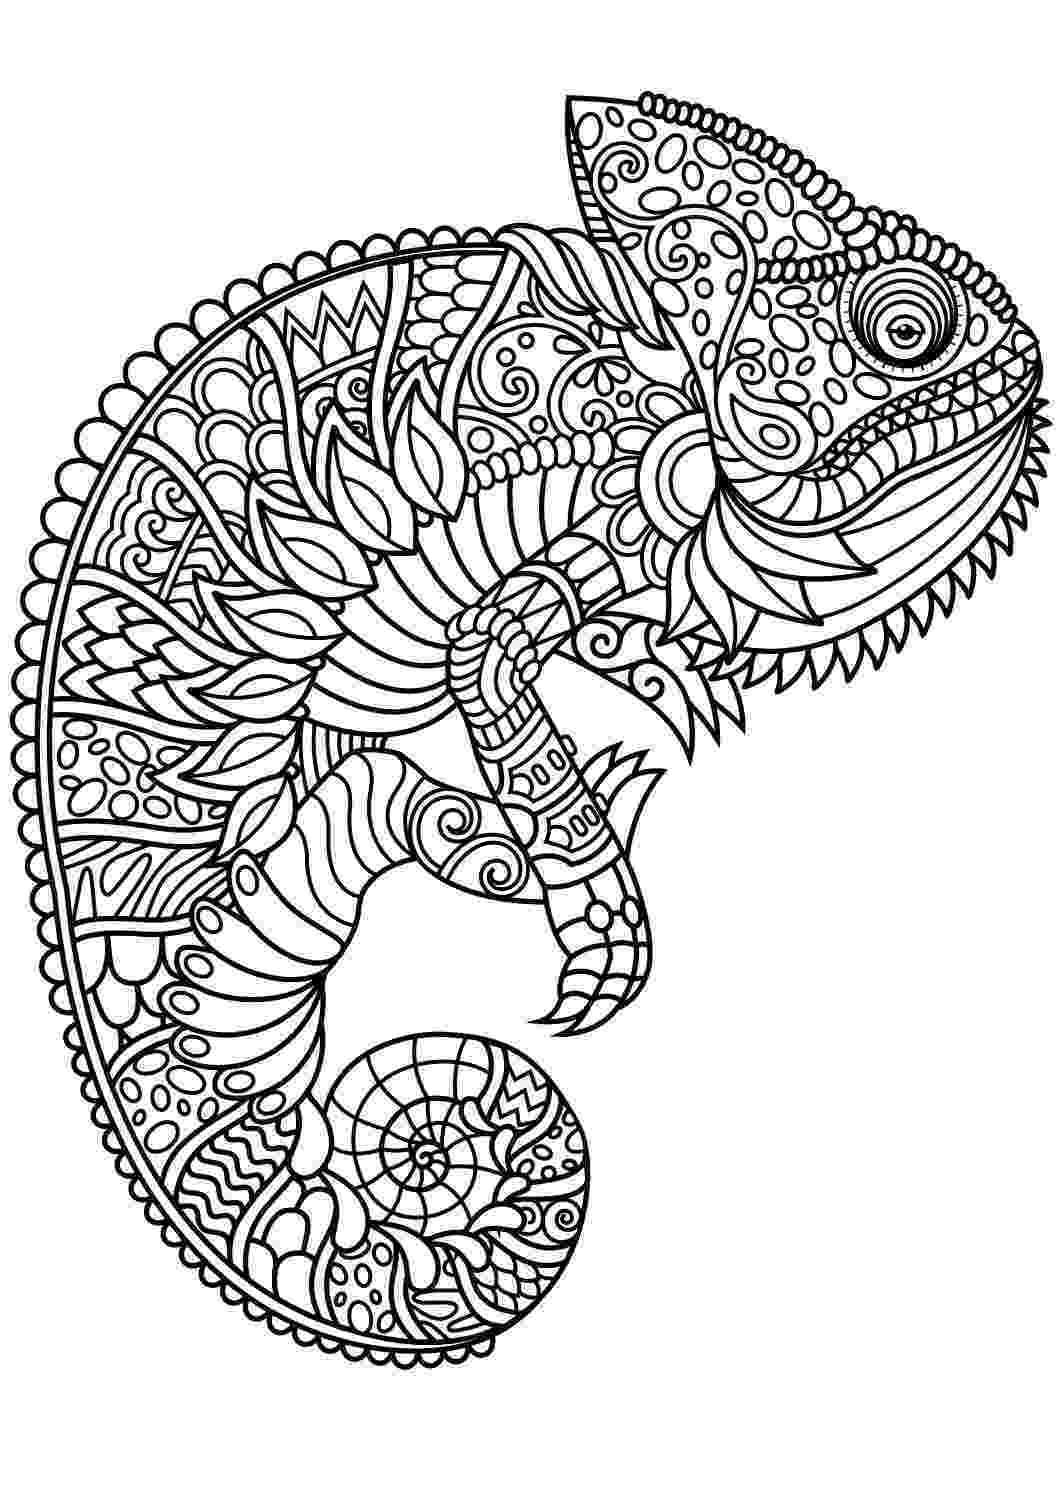 animal coloring pages adults animal coloring pages pdf horse coloring pages dog adults pages coloring animal 